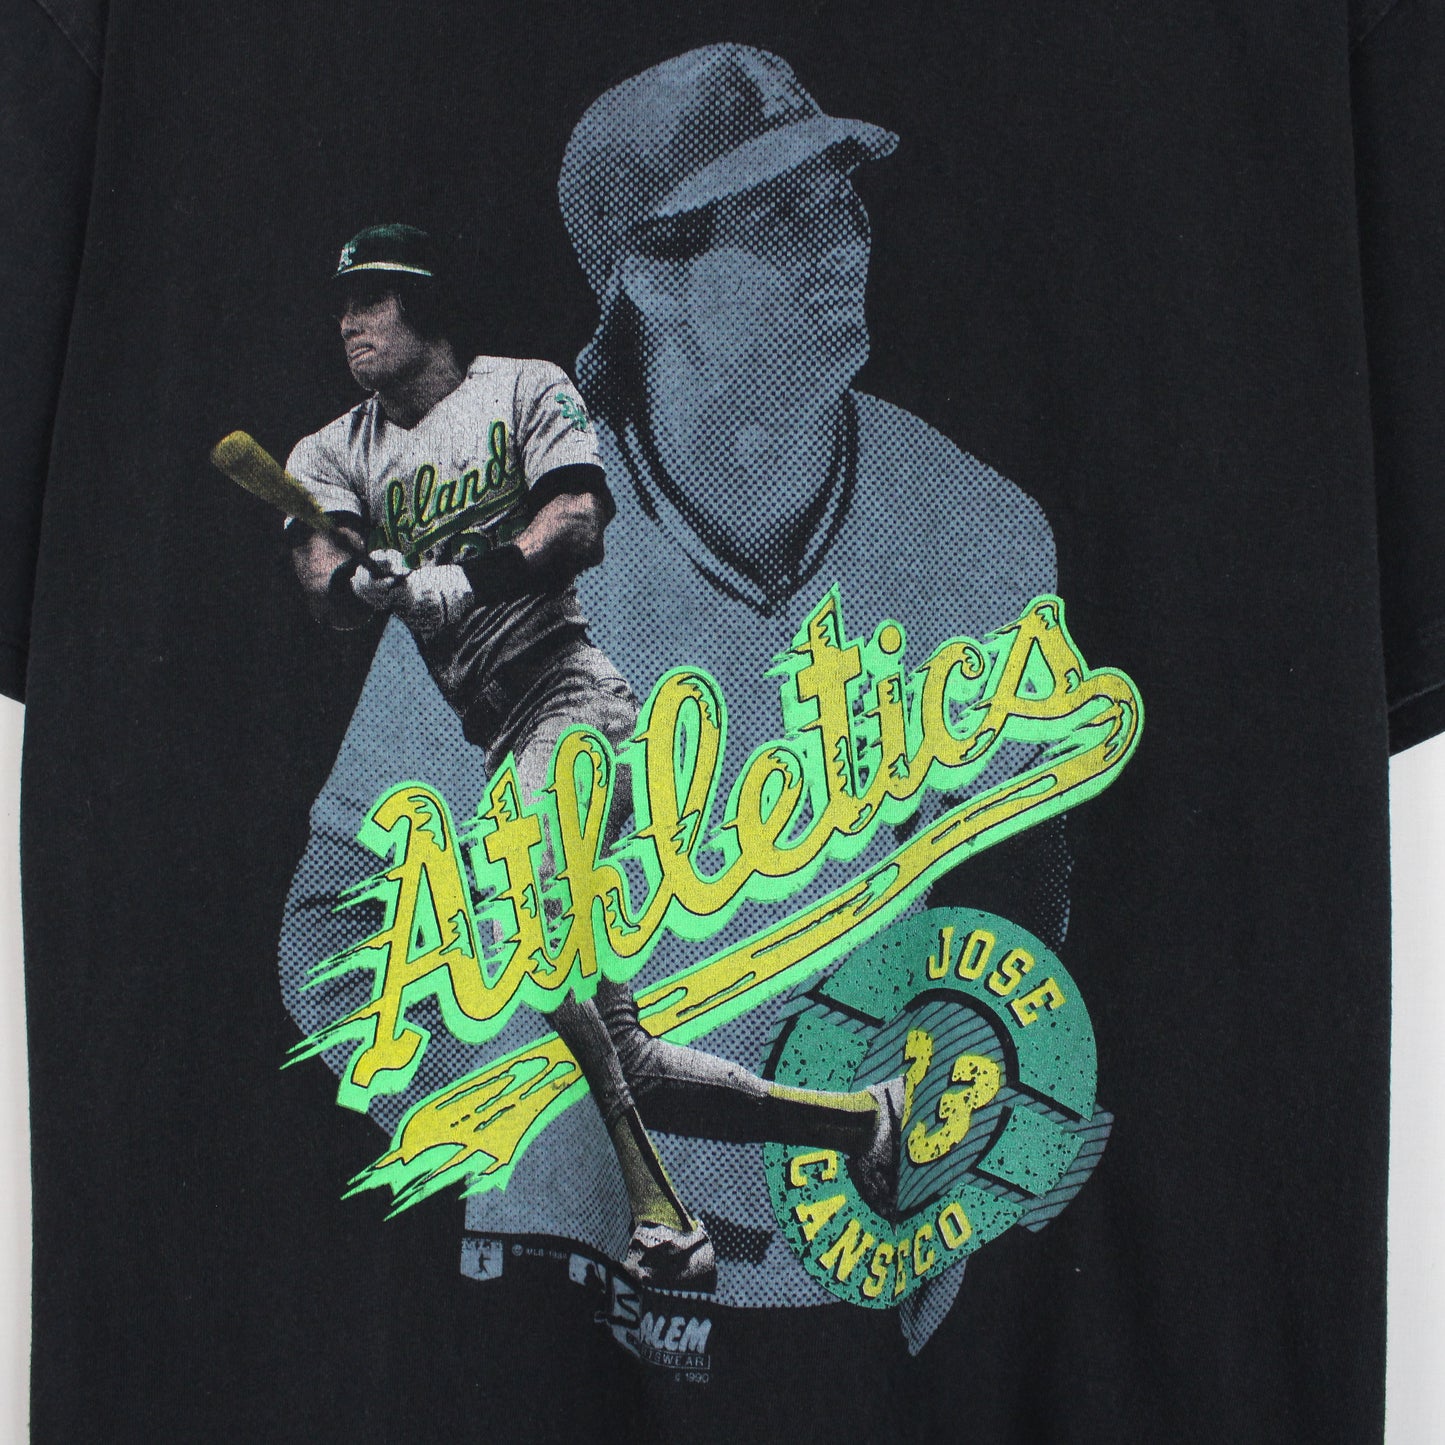 Vintage 1989 Jose Canseco Oakland A's MLB Tee - M